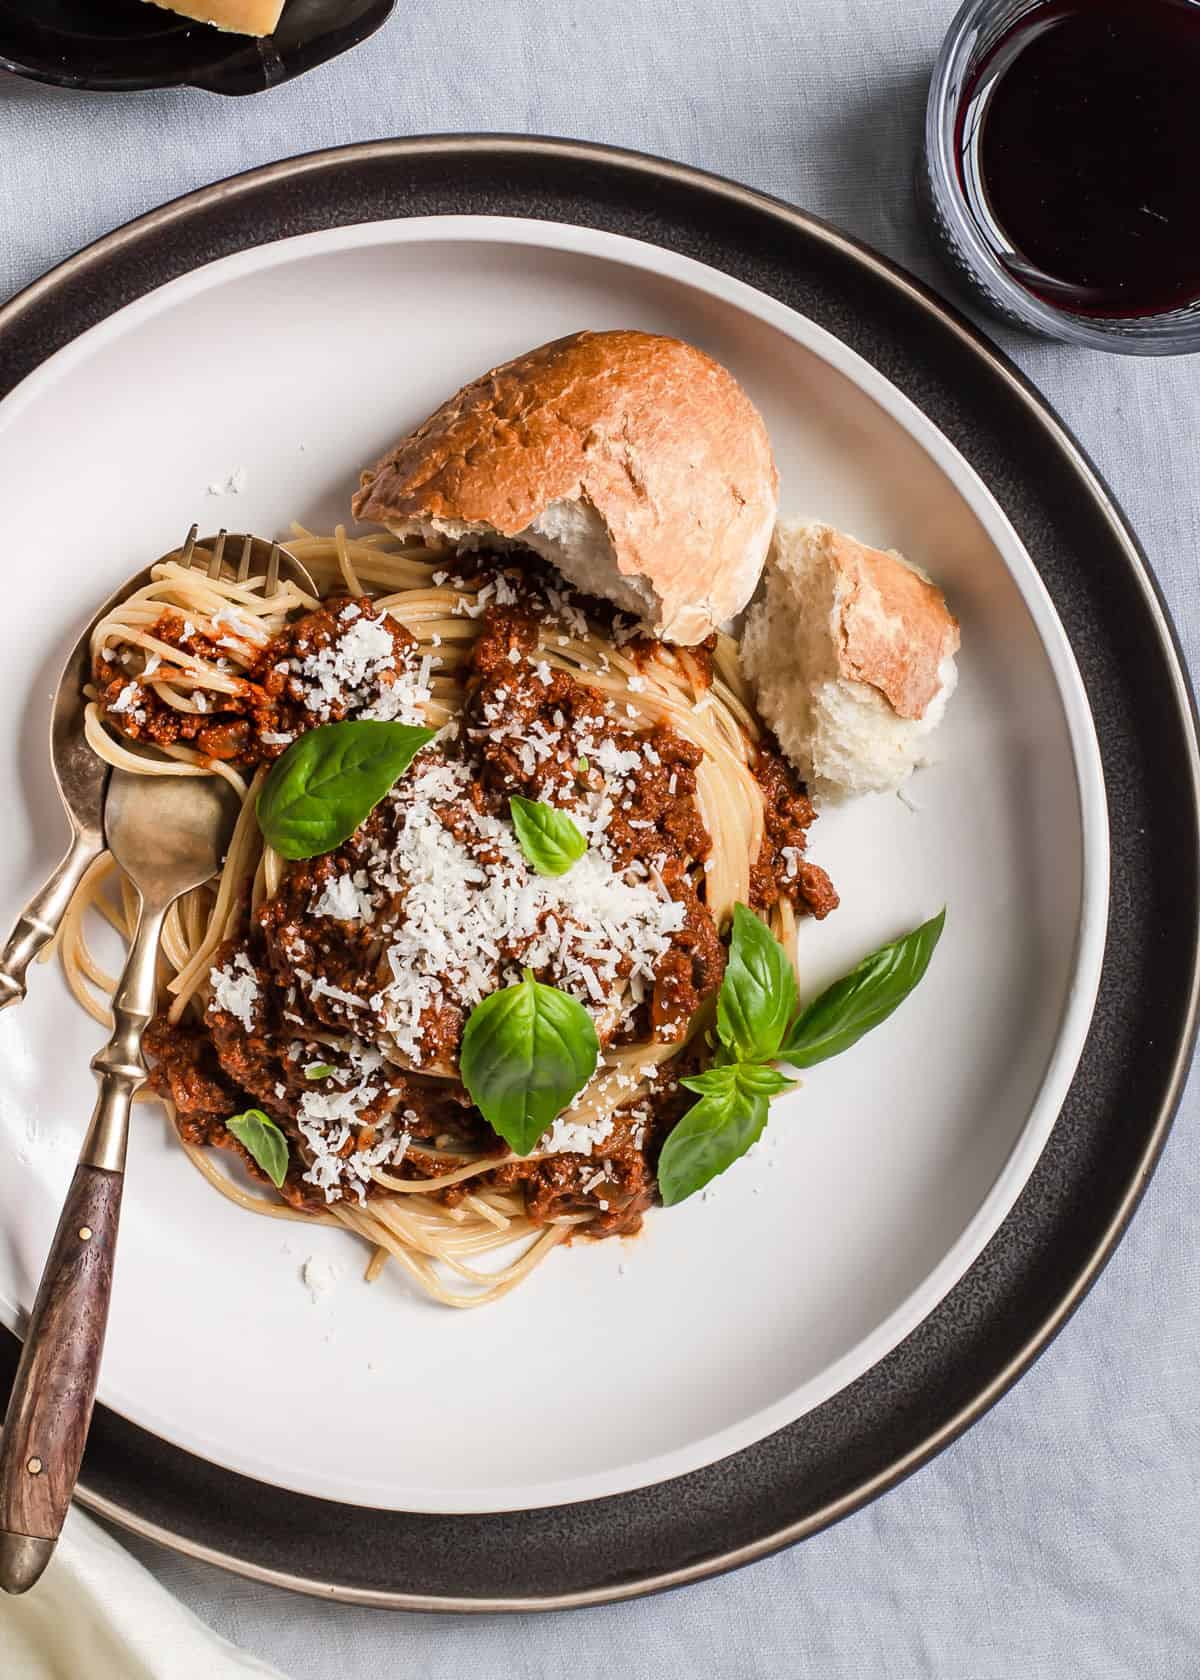 overhead view of spaghetti and meat sauce on white plate, garnished with basil leaves and bread on the side.